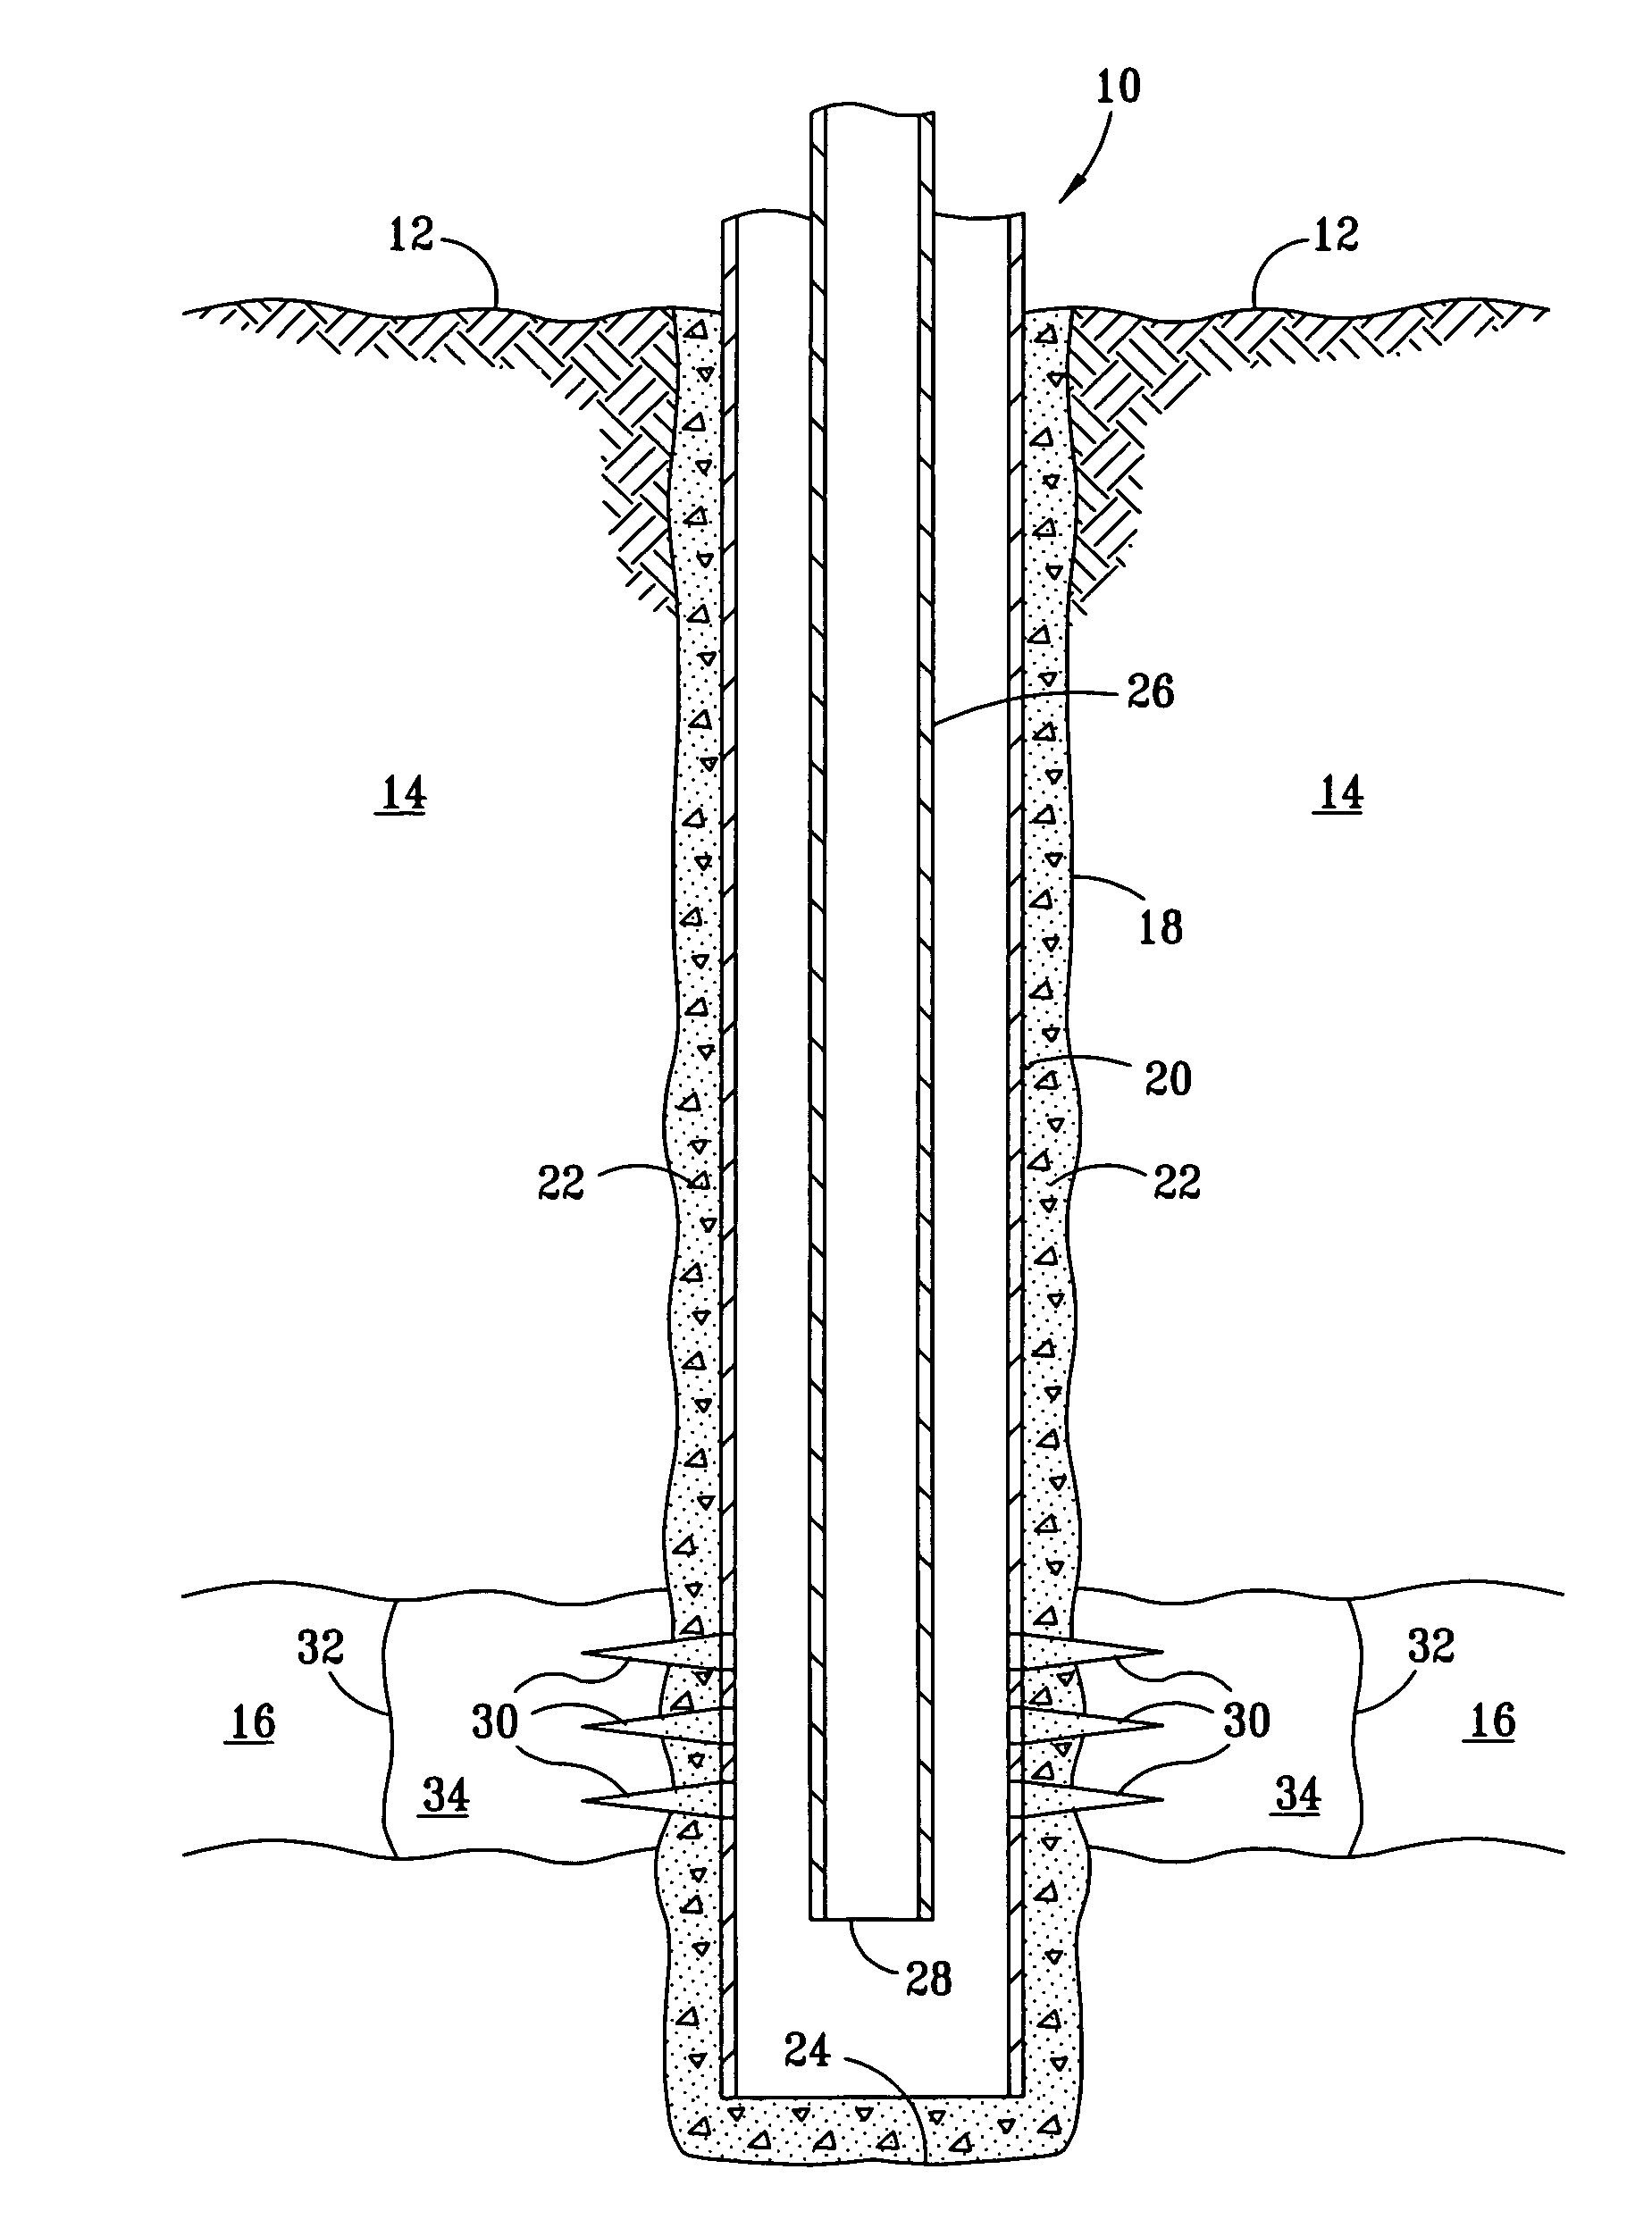 Method for removing iron deposits in a water system